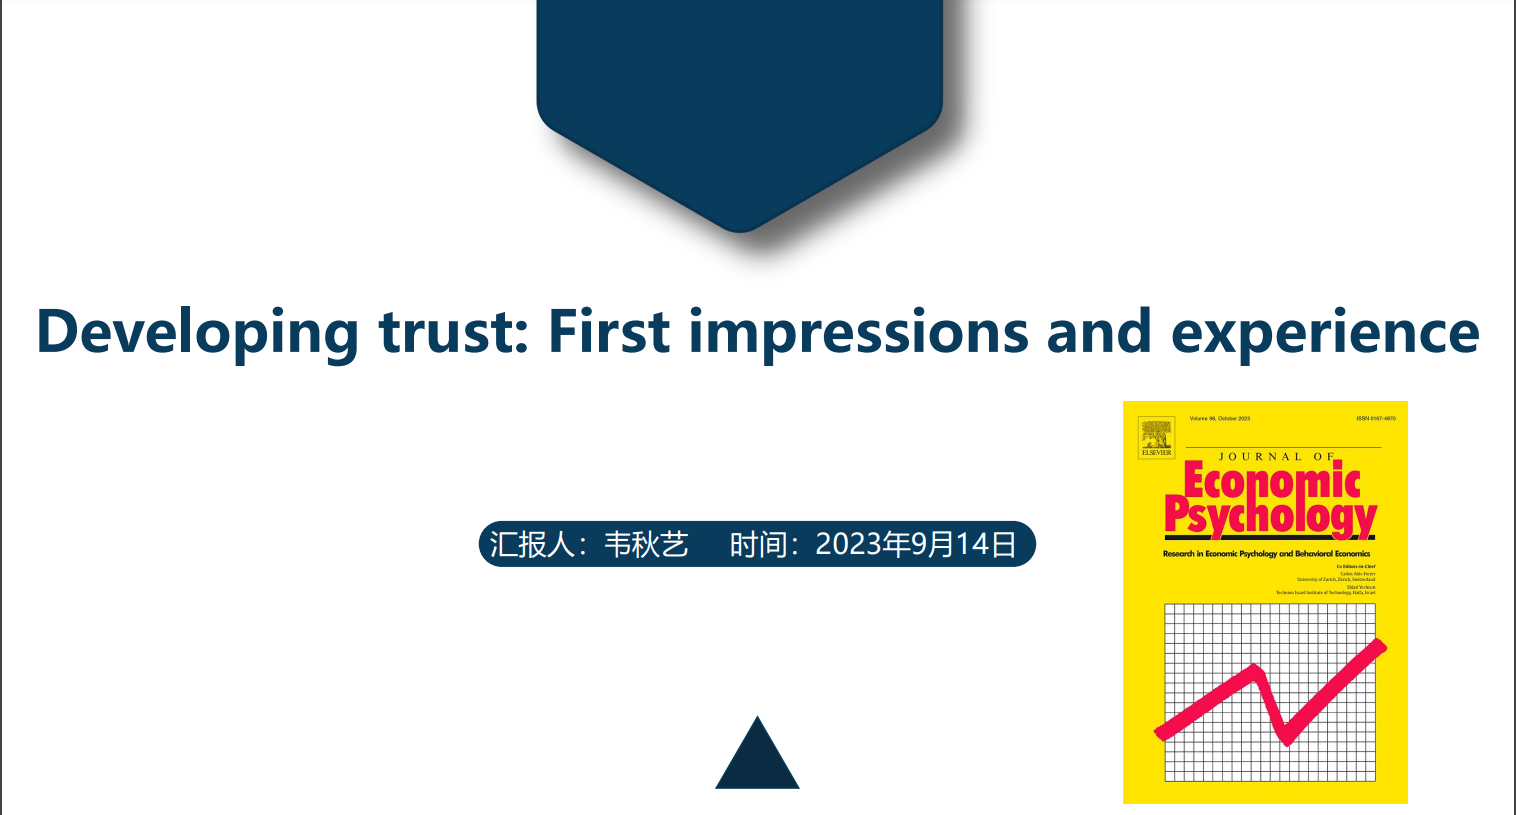 20230914_Developing trust: First impressions and experience